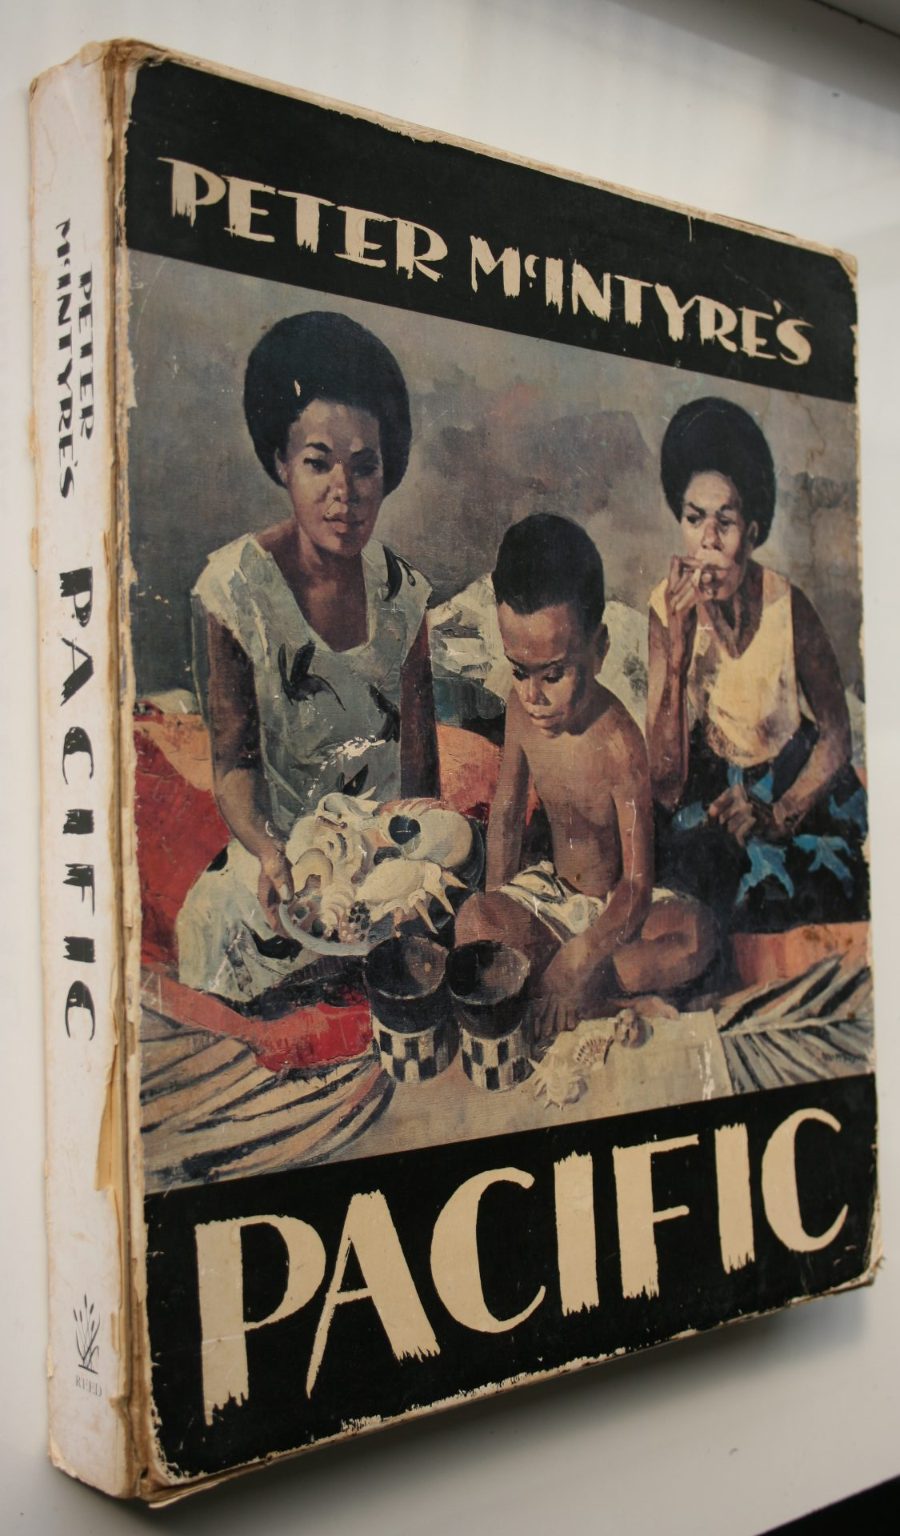 Peter McIntyre's Pacific. 1966. SCARCE SIGNED LIMITED NUMBERED 'PRESENTATION' EDITION. 221/750.